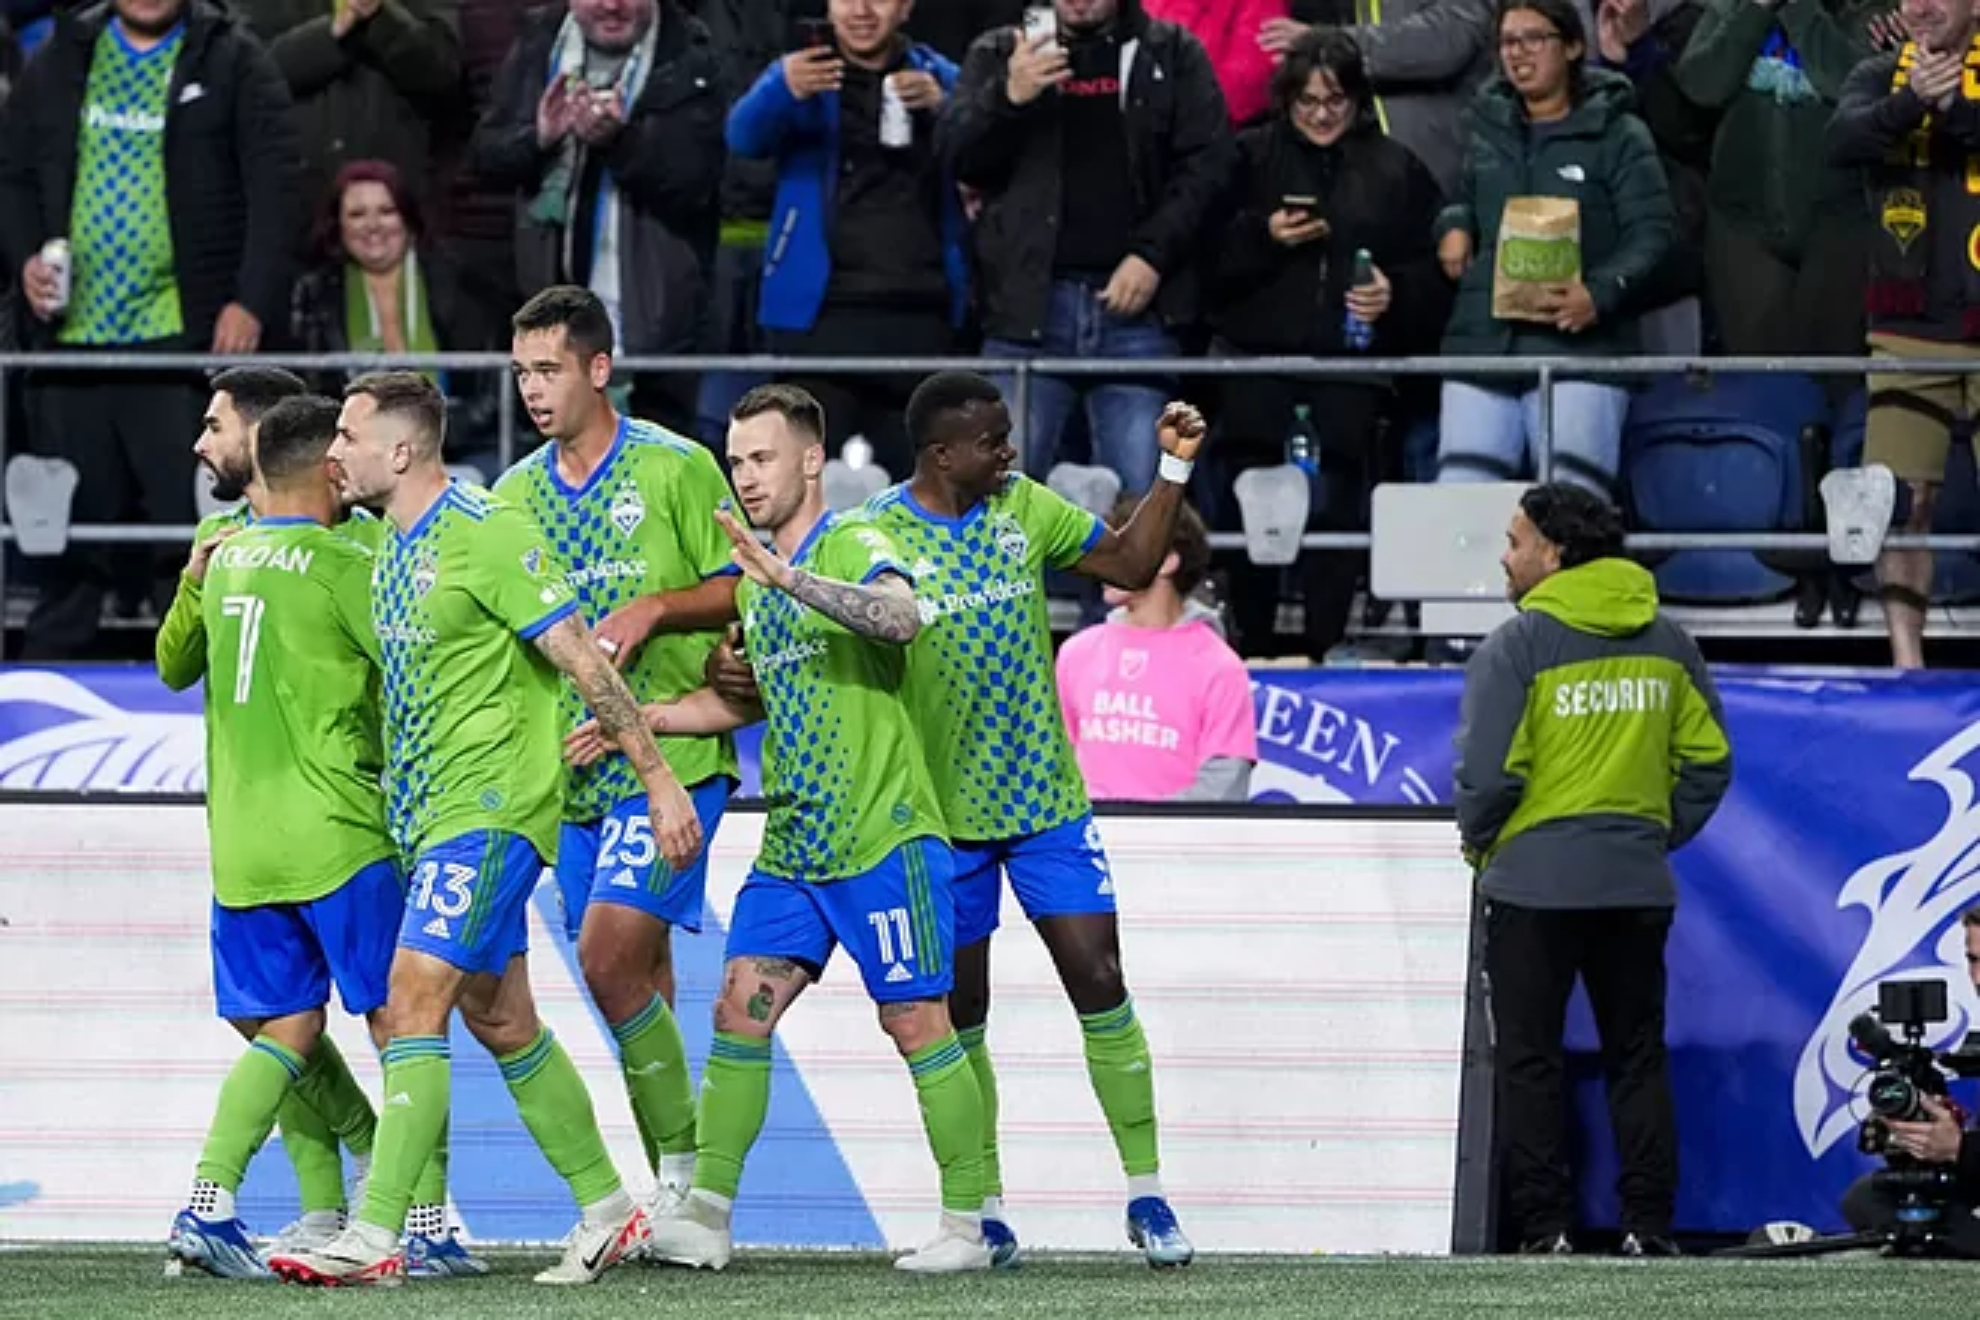 Seattle Sounders to face LAFC in MLS West Semifinals after home victory against FC Dallas